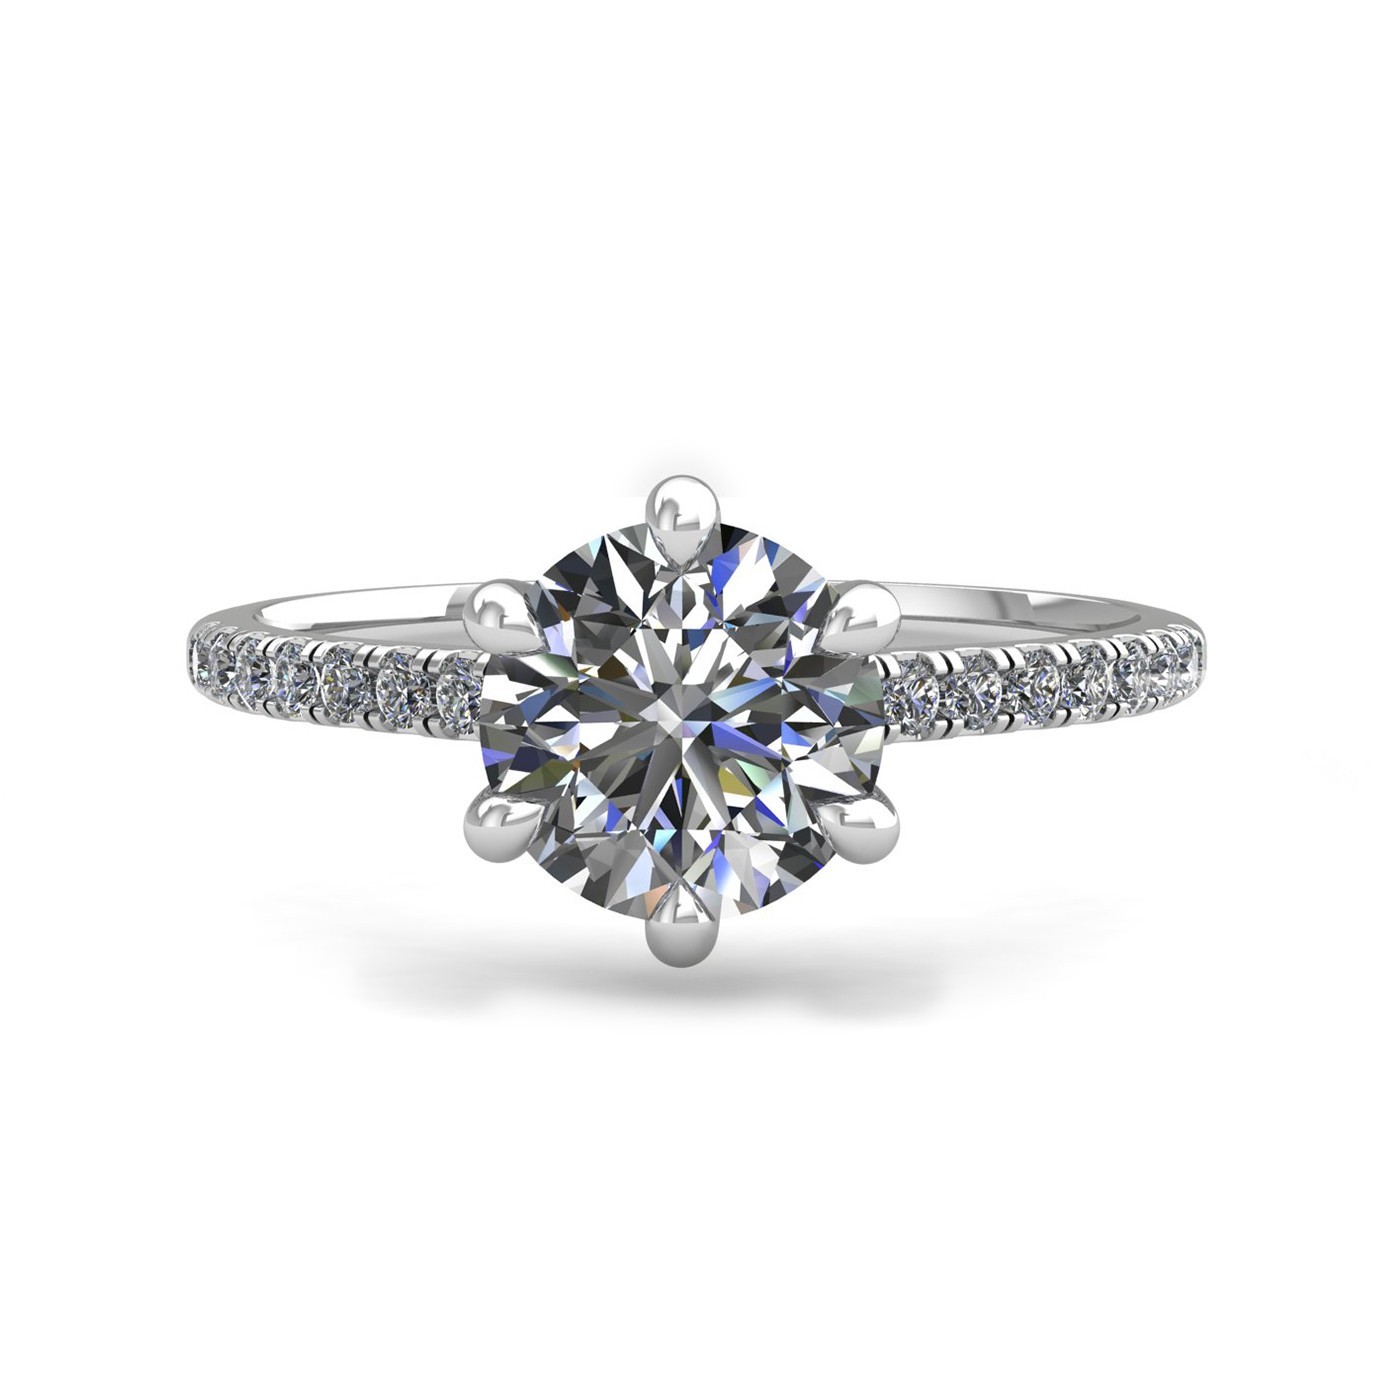 18k white gold 1,00 ct 6 prongs round cut diamond engagement ring with whisper thin pavÉ set band Photos & images